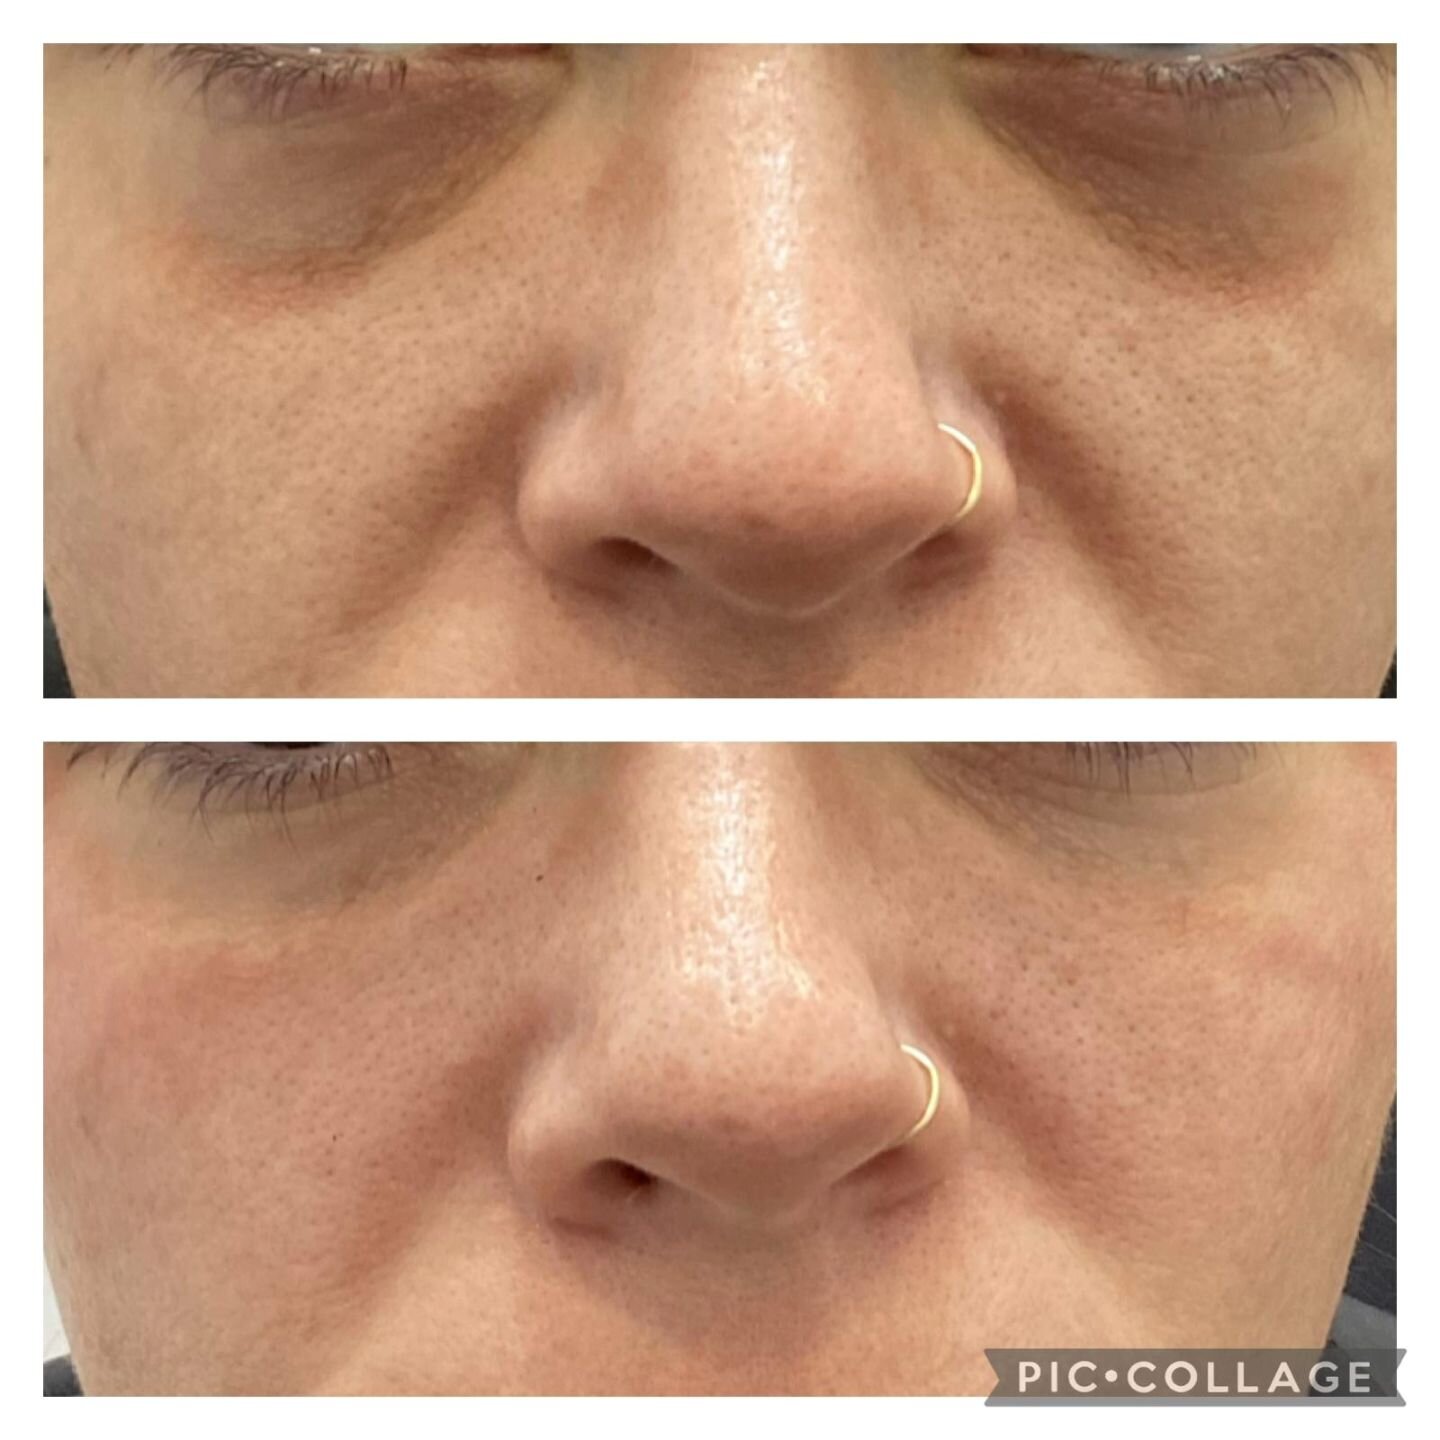 Experience the magic of our skilled nurse injector, Nurse Sara, at Sayaderm Cosmetic Injectables! ✨ 

One syringe of Teosyal Redensity 2 transformed these under eyes, leaving our client delighted. 
Say goodbye to dark circles and hello to a refreshed